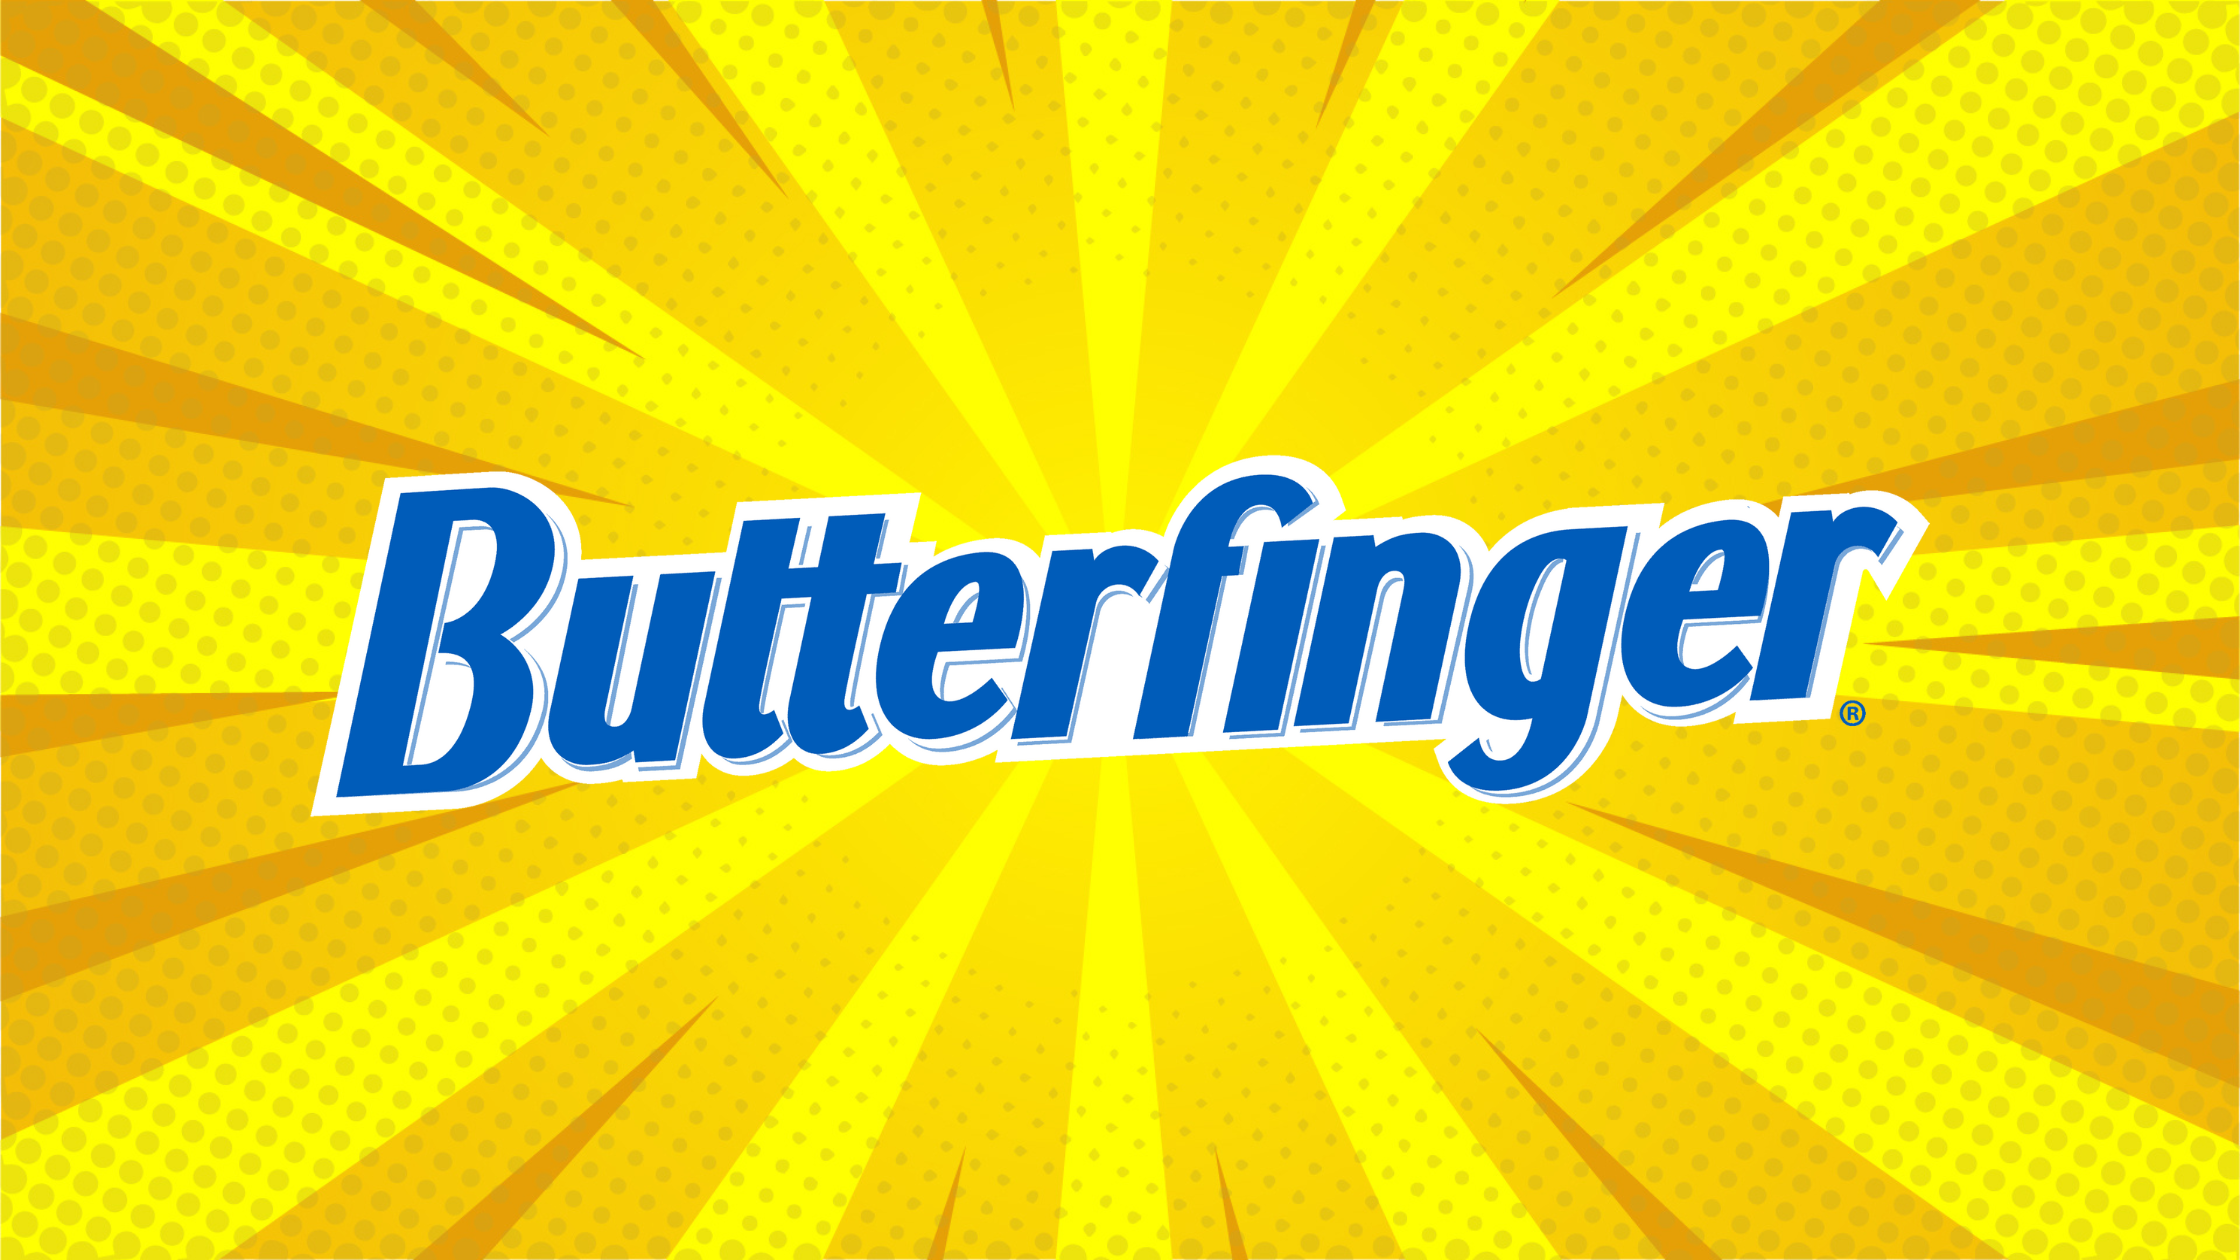 The All-American Legacy of the Butterfinger Candy Bar